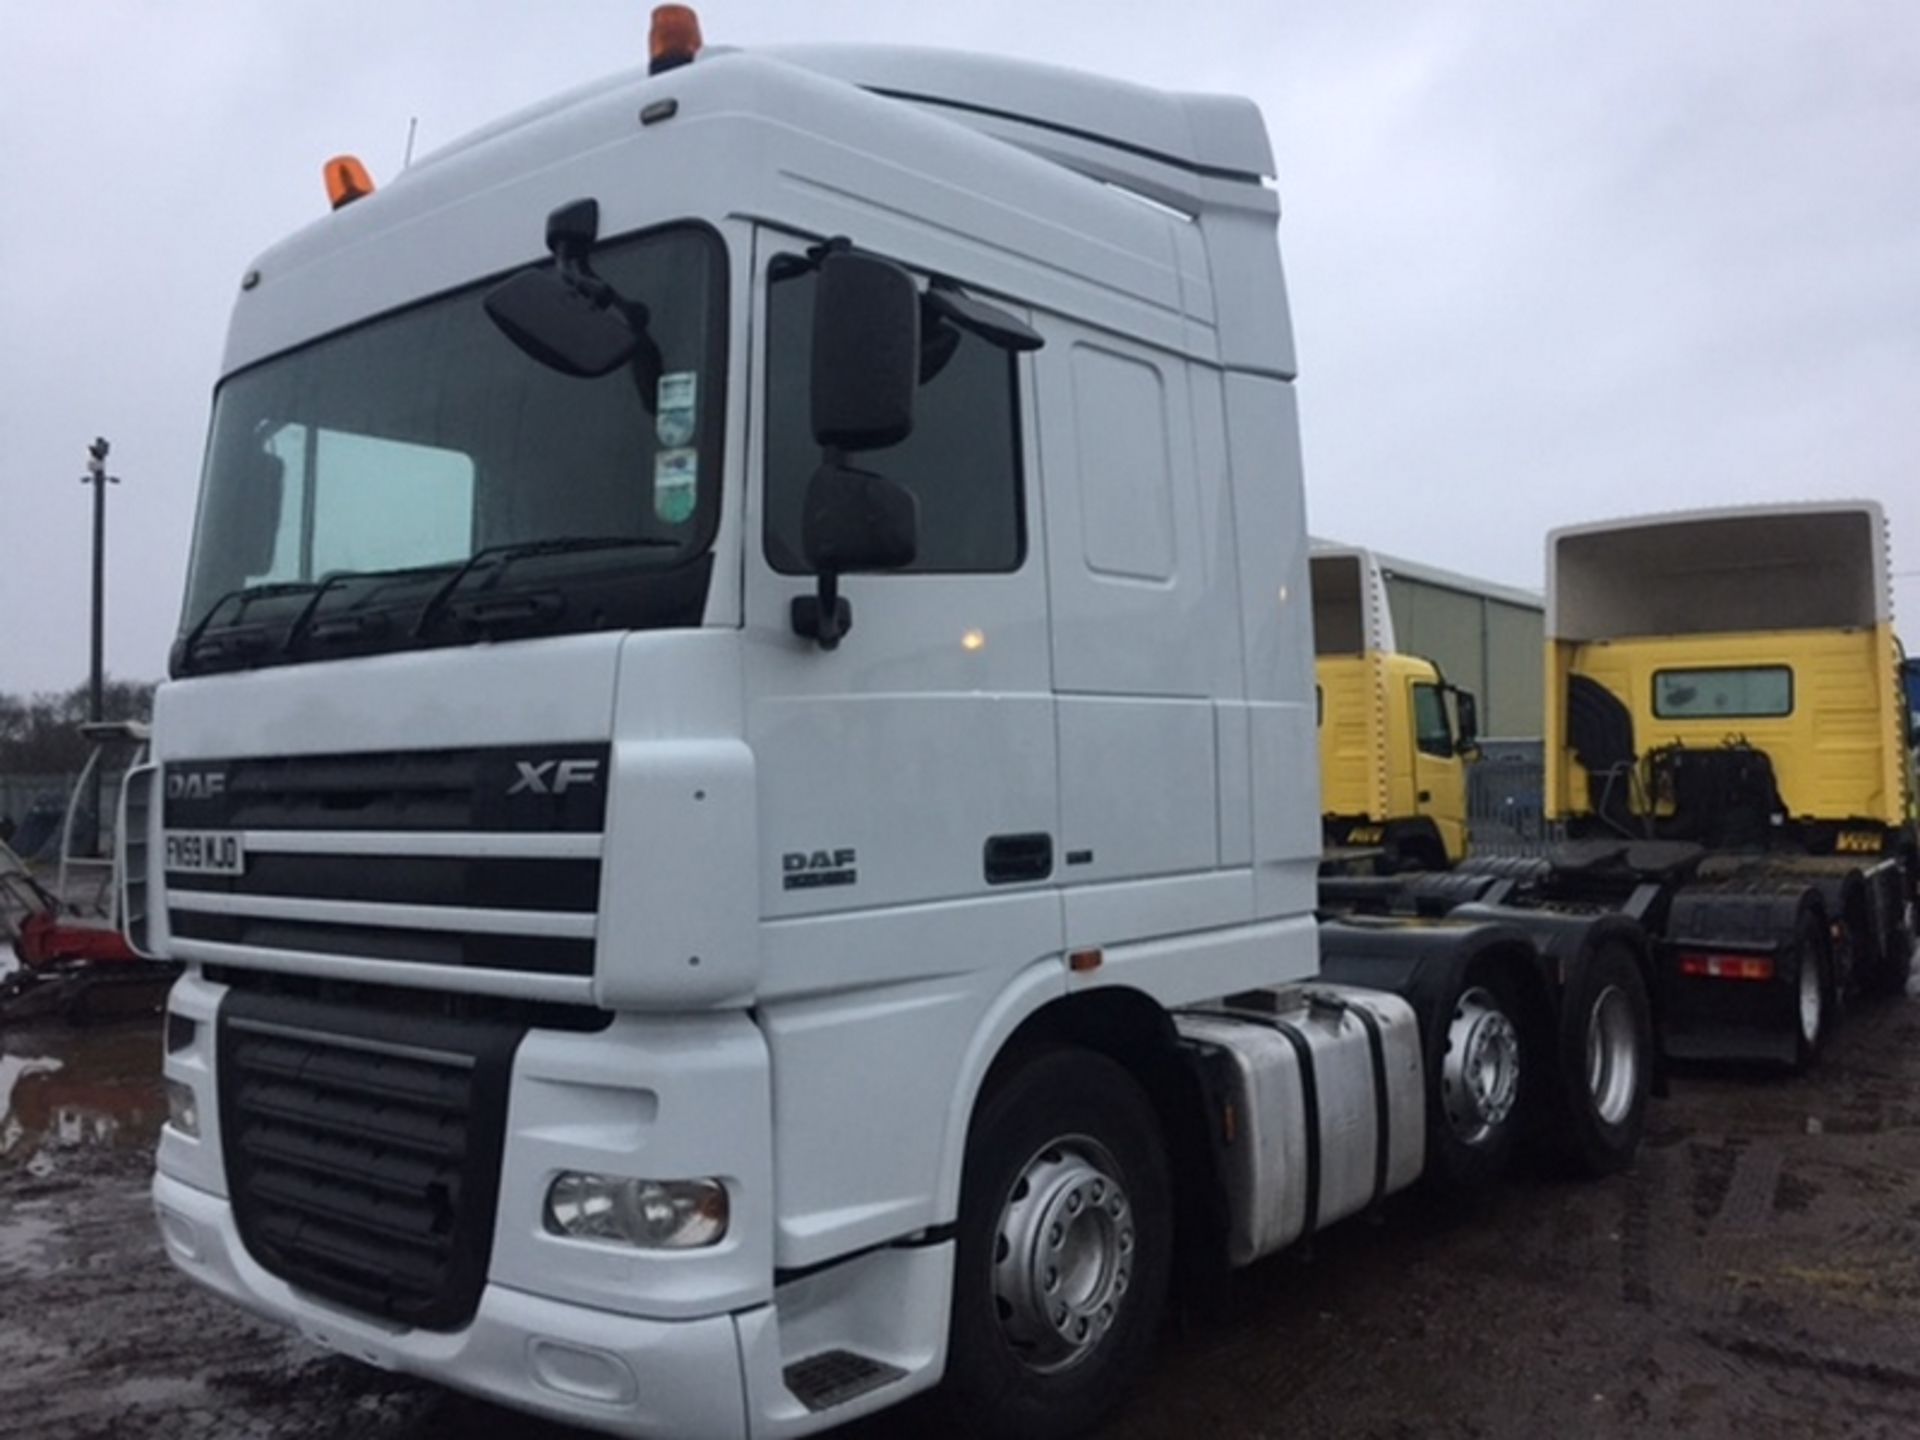 DAF XF105 460 Midlift Tractor Unit 6x2 Diesel Automatic - FN59MJO - Image 11 of 12